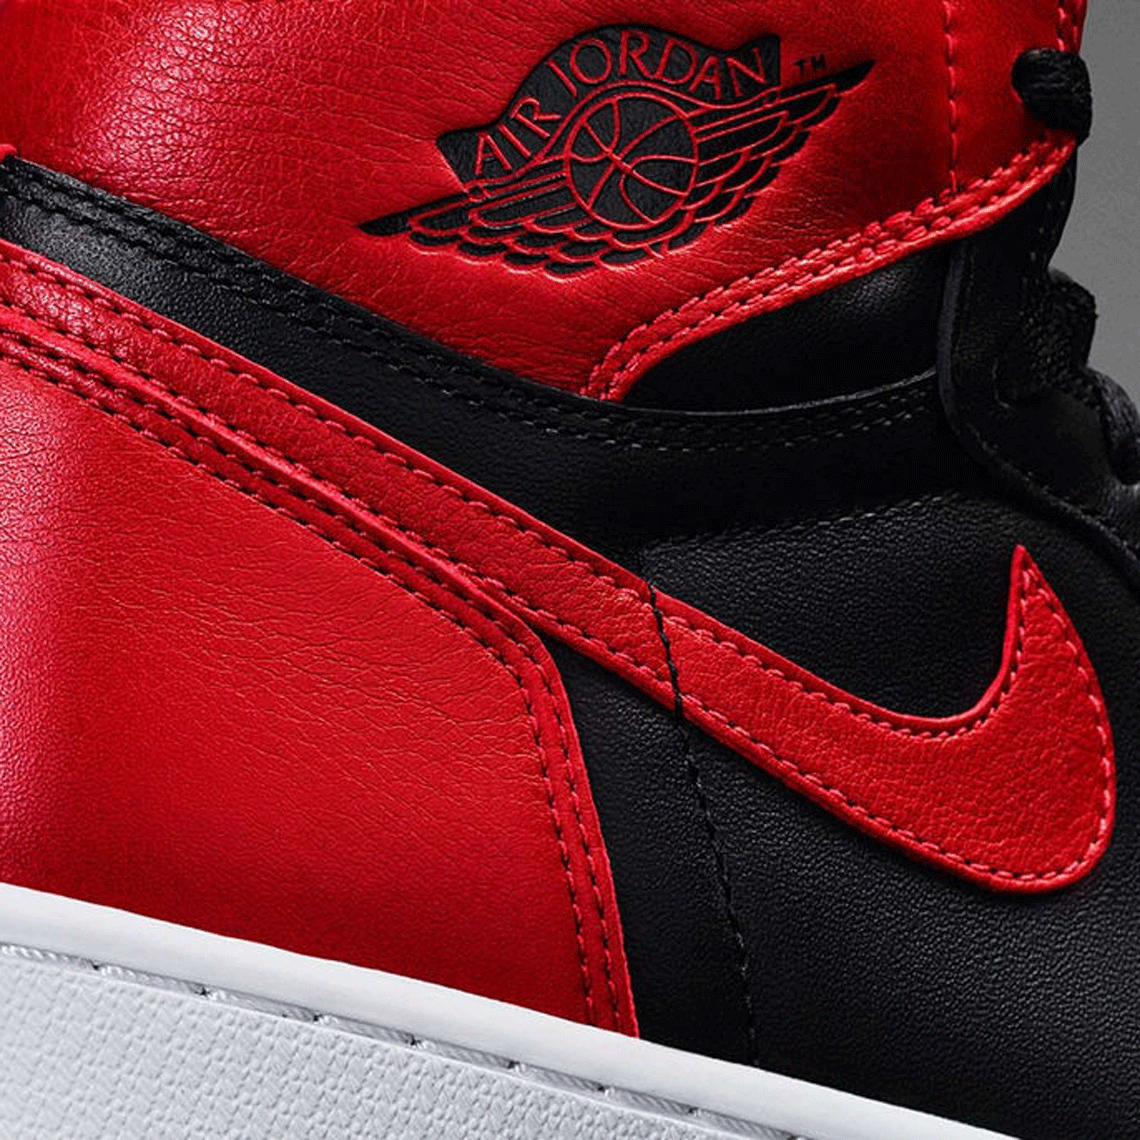 Why Are Jordan 1s So Expensive – A Breakdown | SneakerNews.com